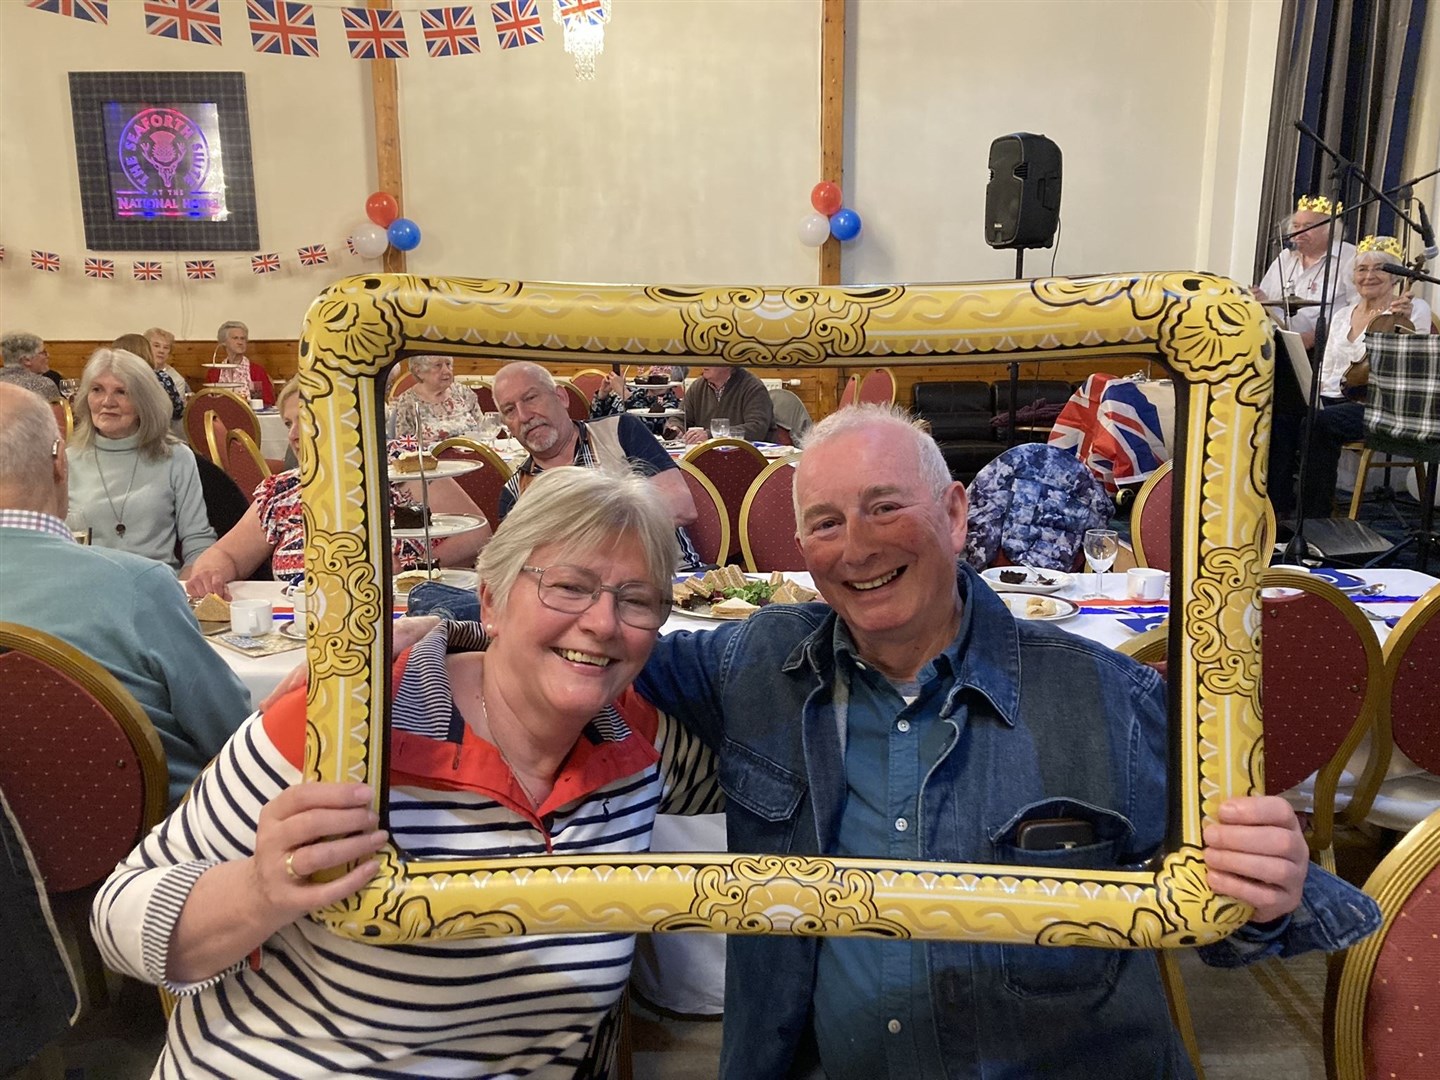 More fun at the Dingwall lunch.